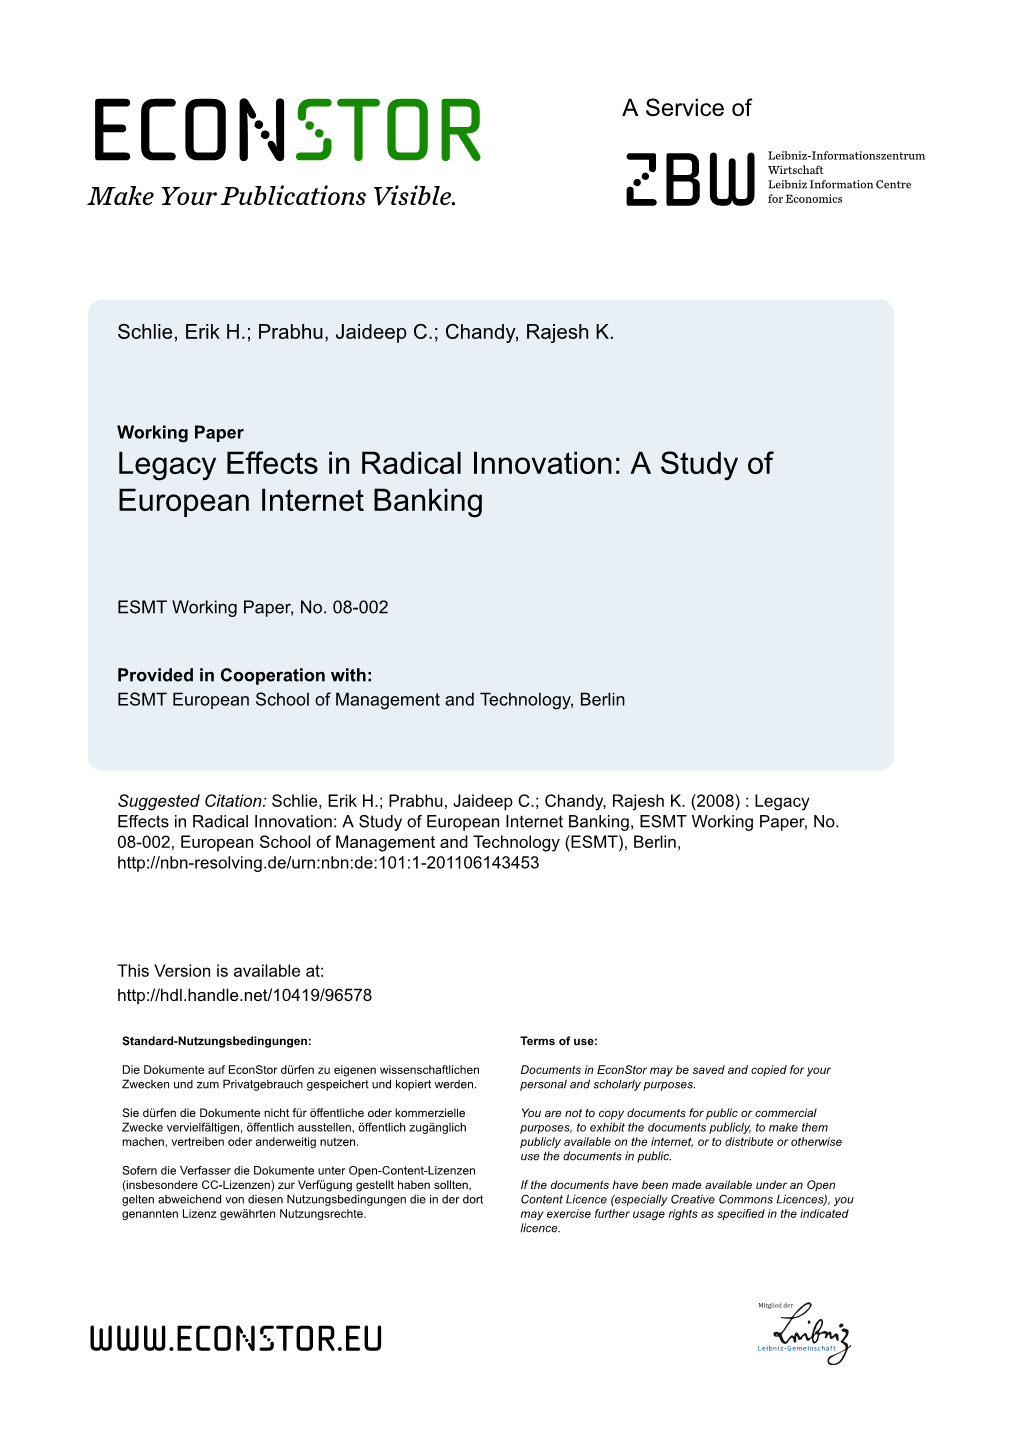 Legacy Effects in Radical Innovation: a Study of European Internet Banking